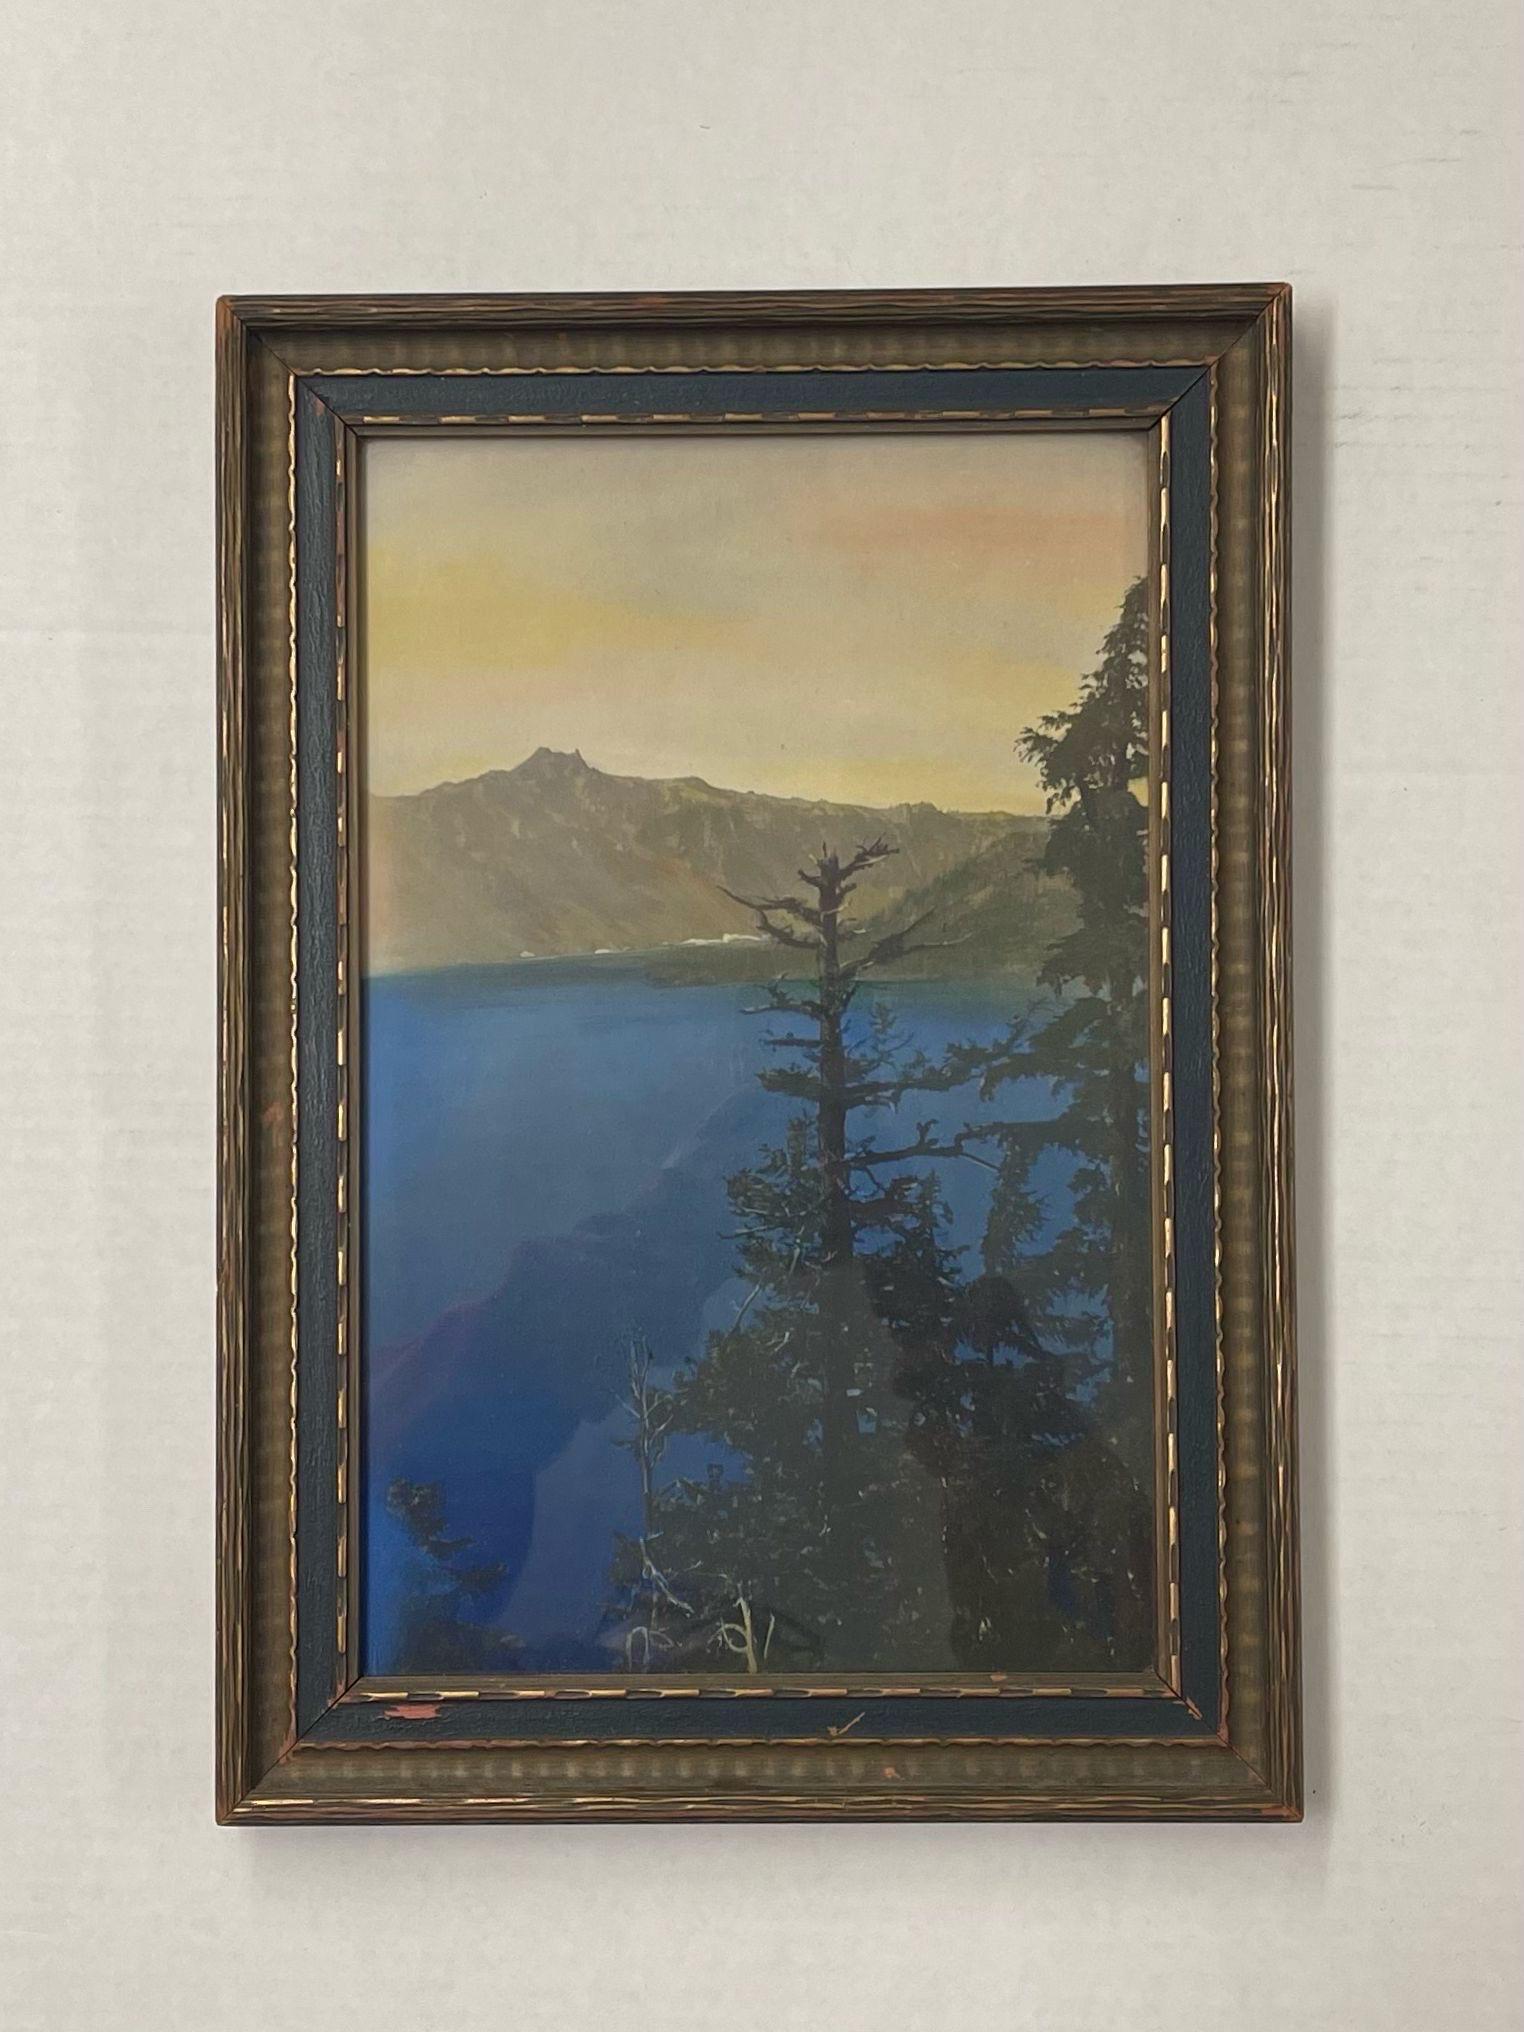 Vintage Landscape Artwork on Paper within a Wooden Frame. Possibly 1930s Frame. Possibly Pen Watercolor. Unsigned. Vintage Condition Consistent with Age as Pictured.

Dimensions. 12 W ; 1 D ; 16 1/2 H